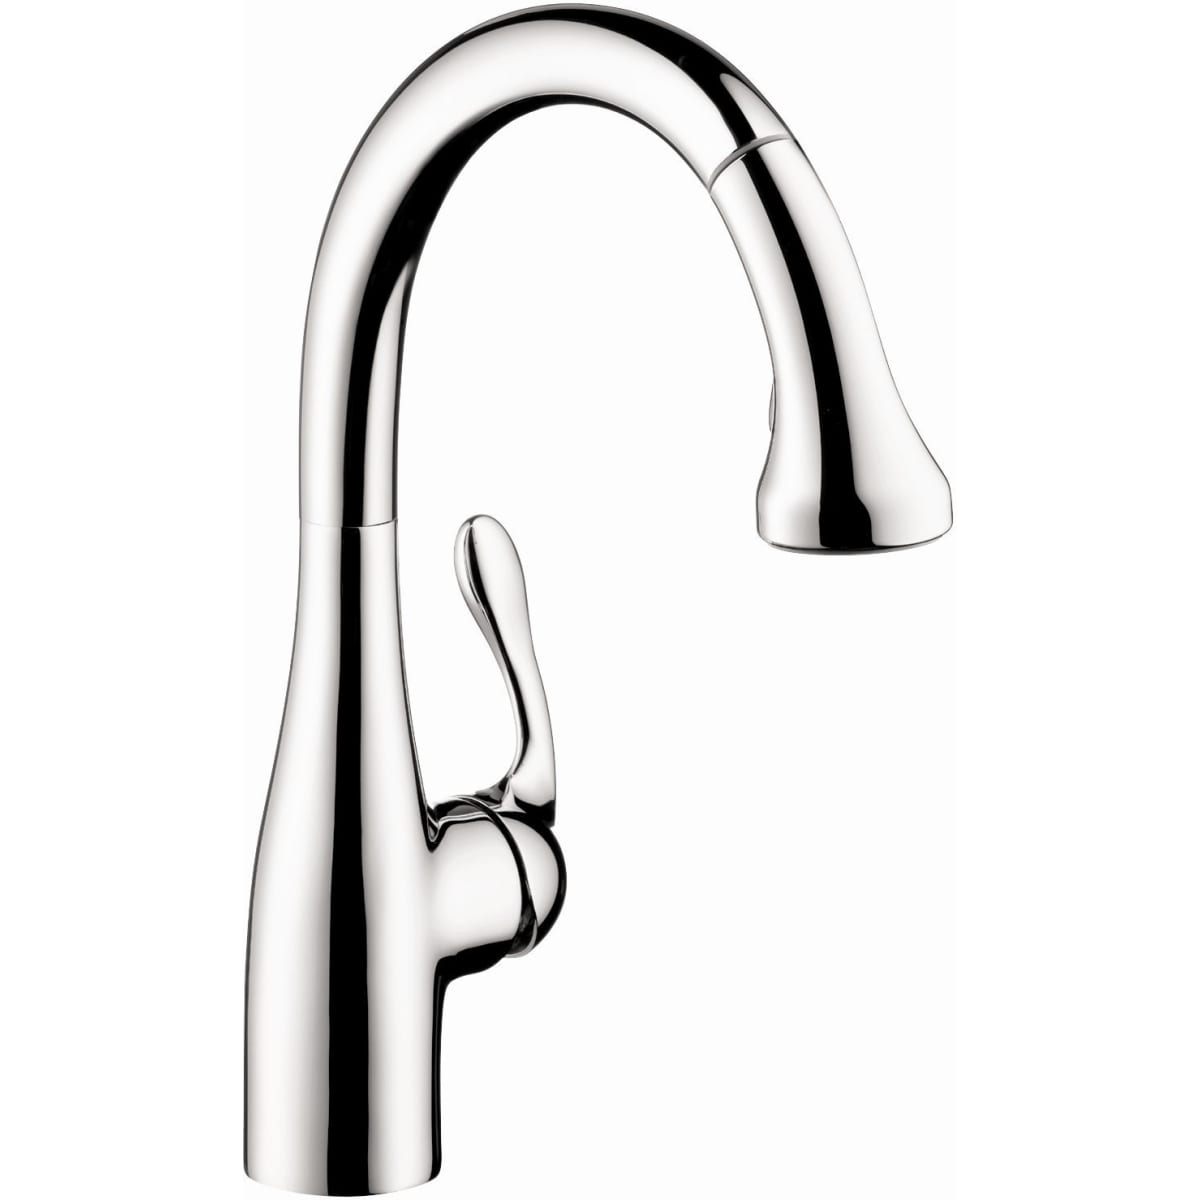 Hansgrohe 04066000 Chrome Allegro E Pull Down Kitchen Faucet Gourmet With High Arc Spout Magnetic Docking Locking Spray Diverter Includes Lifetime Warranty Faucet Com